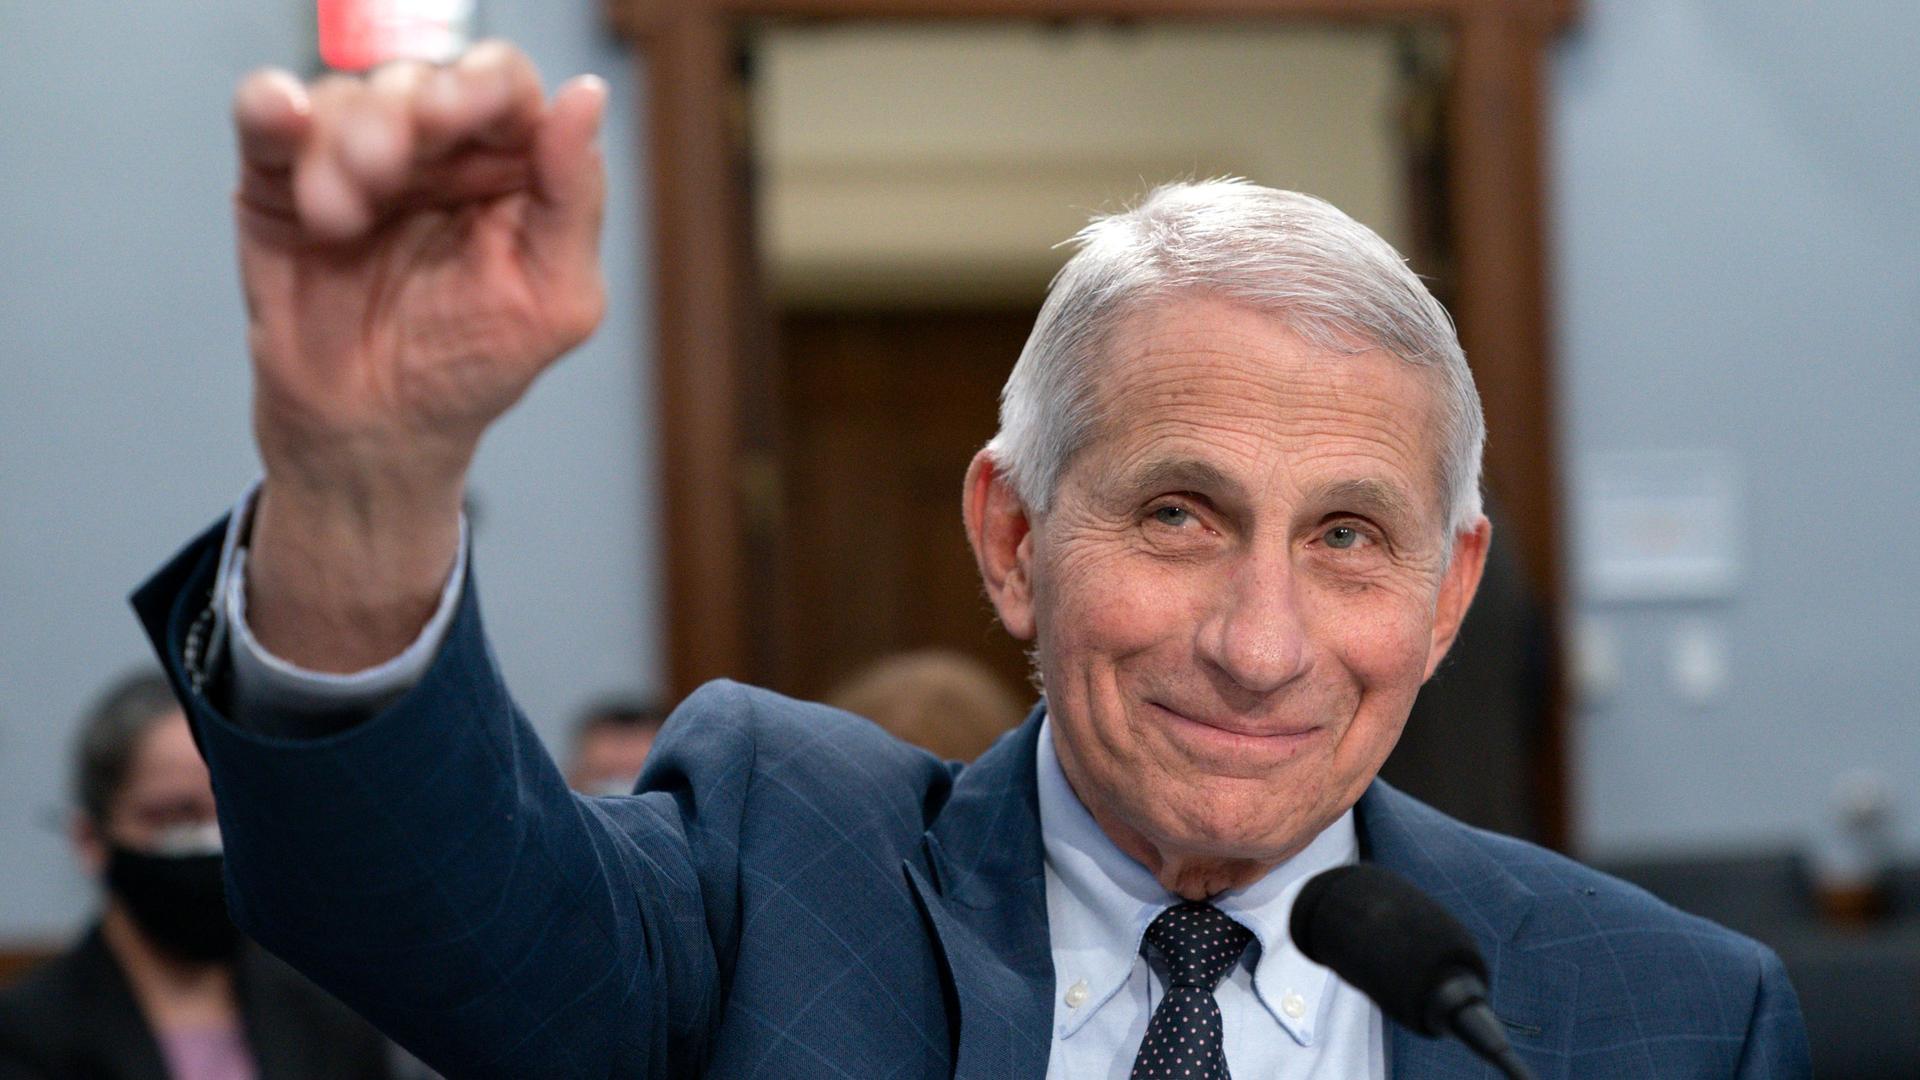 Dr. Anthony Fauci, director of the National Institute of Allergy and Infectious Diseases, waves hello to the committee at the start of a House Committee on Appropriations subcommittee on Labor, Health and Human Services, Education, and Related Agencies.